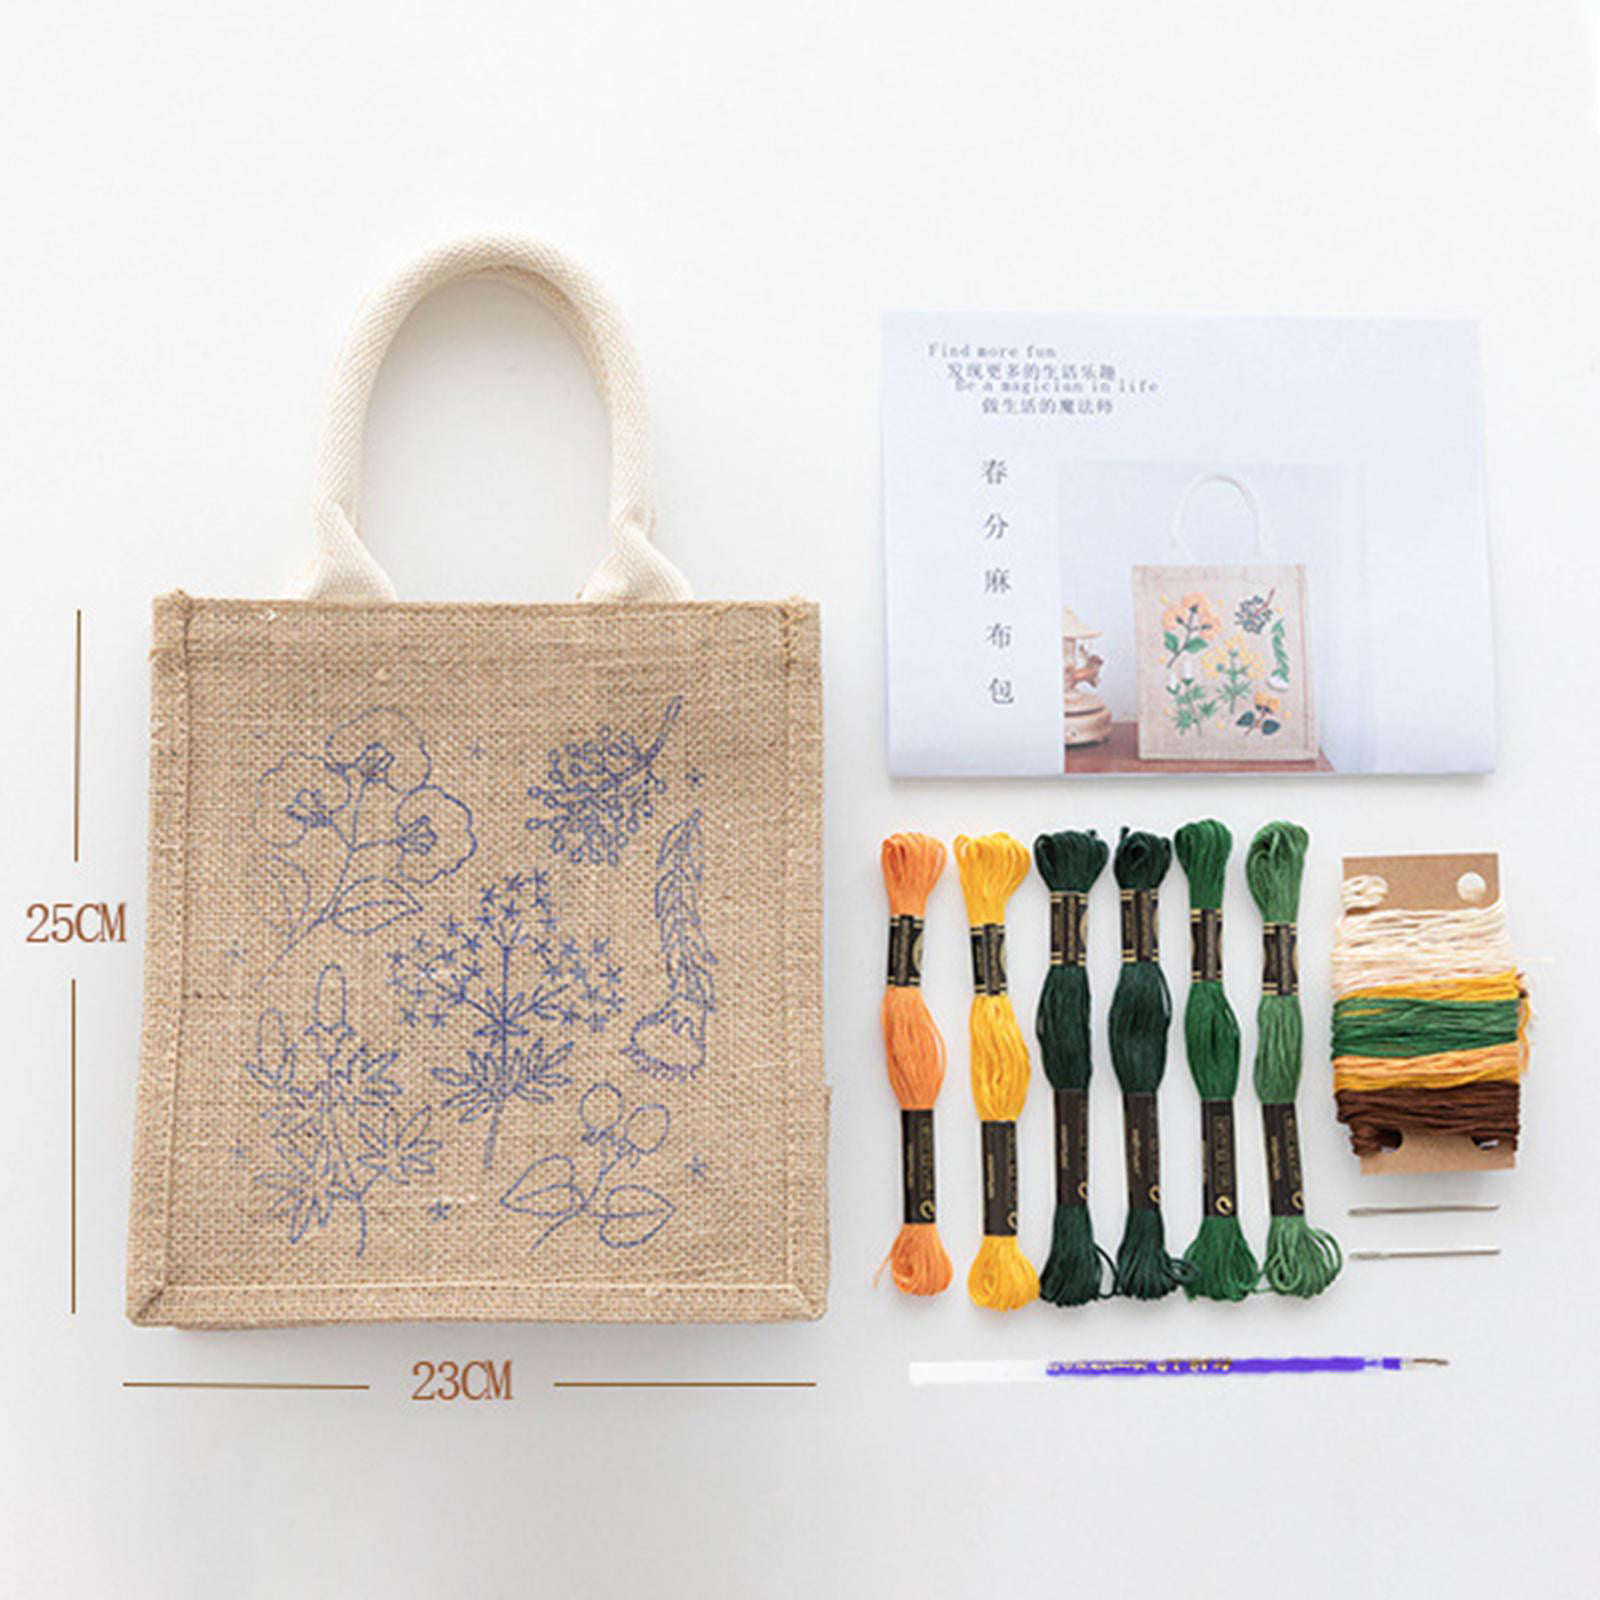 Embroidery Bag Kit Handmade Craft Organizer Bag Embroidery Projects Girls  Gift for Beginners , Type A 